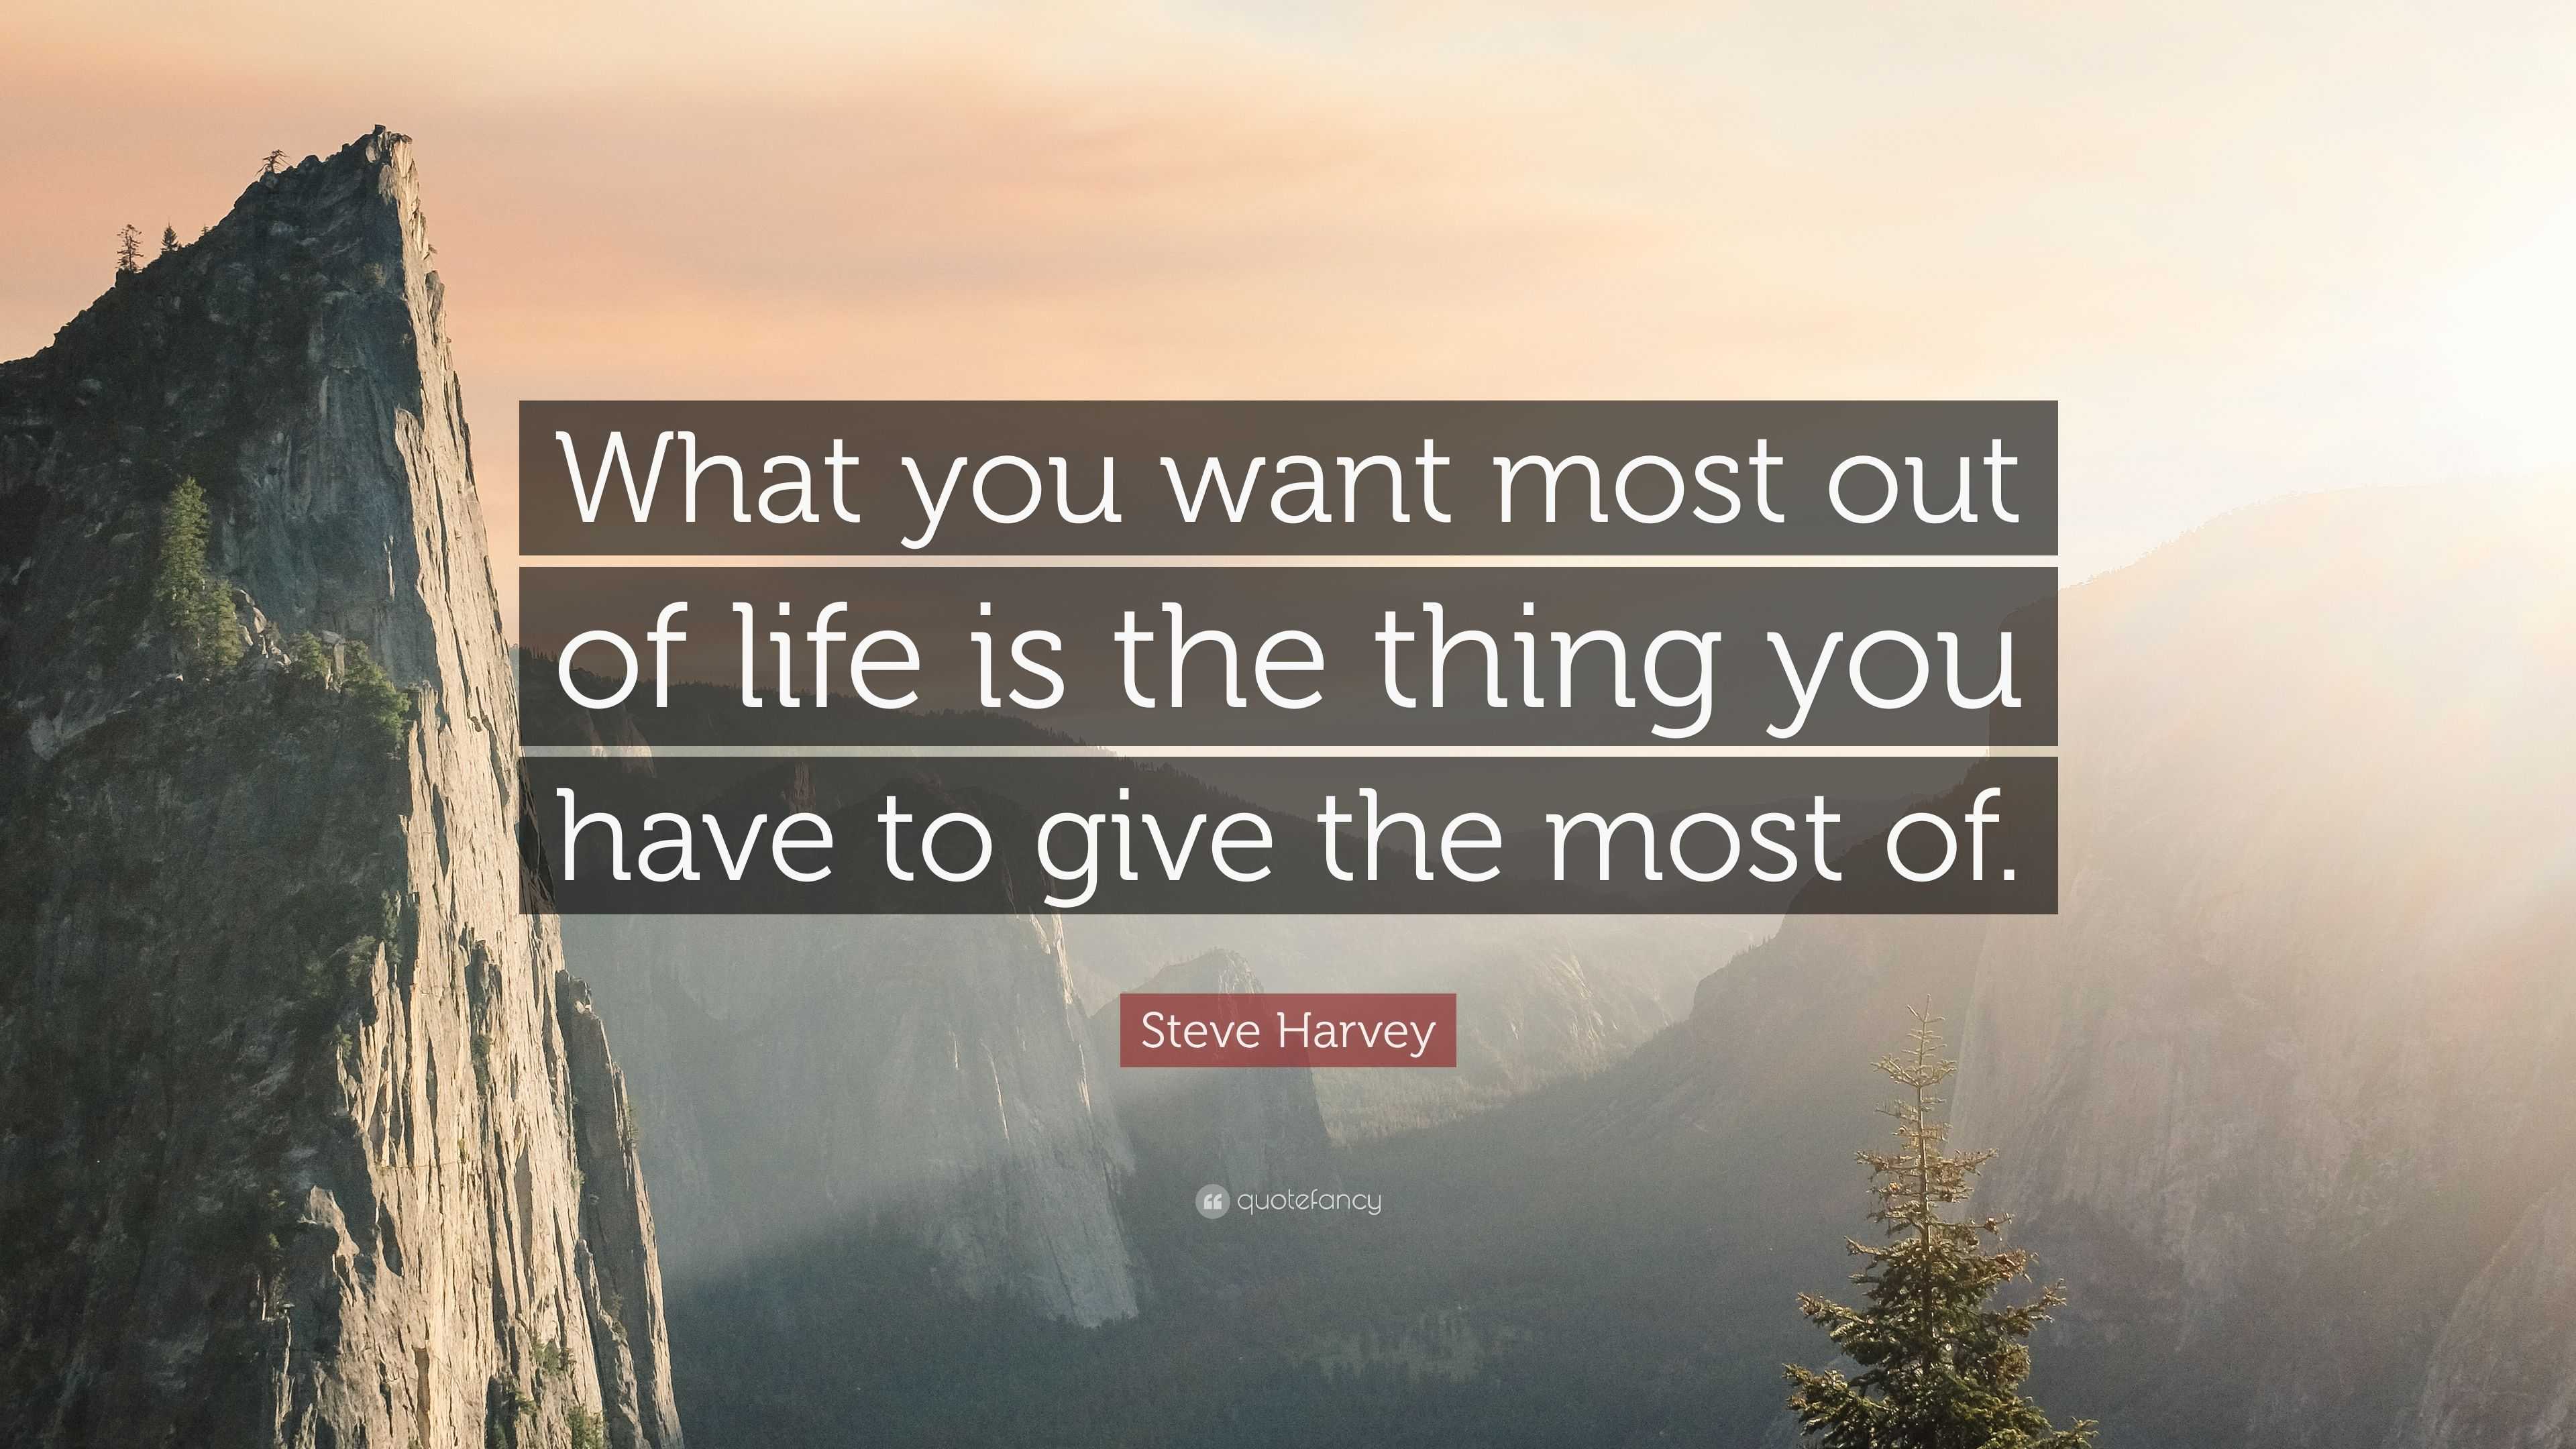 https://quotefancy.com/media/wallpaper/3840x2160/5029253-Steve-Harvey-Quote-What-you-want-most-out-of-life-is-the-thing-you.jpg